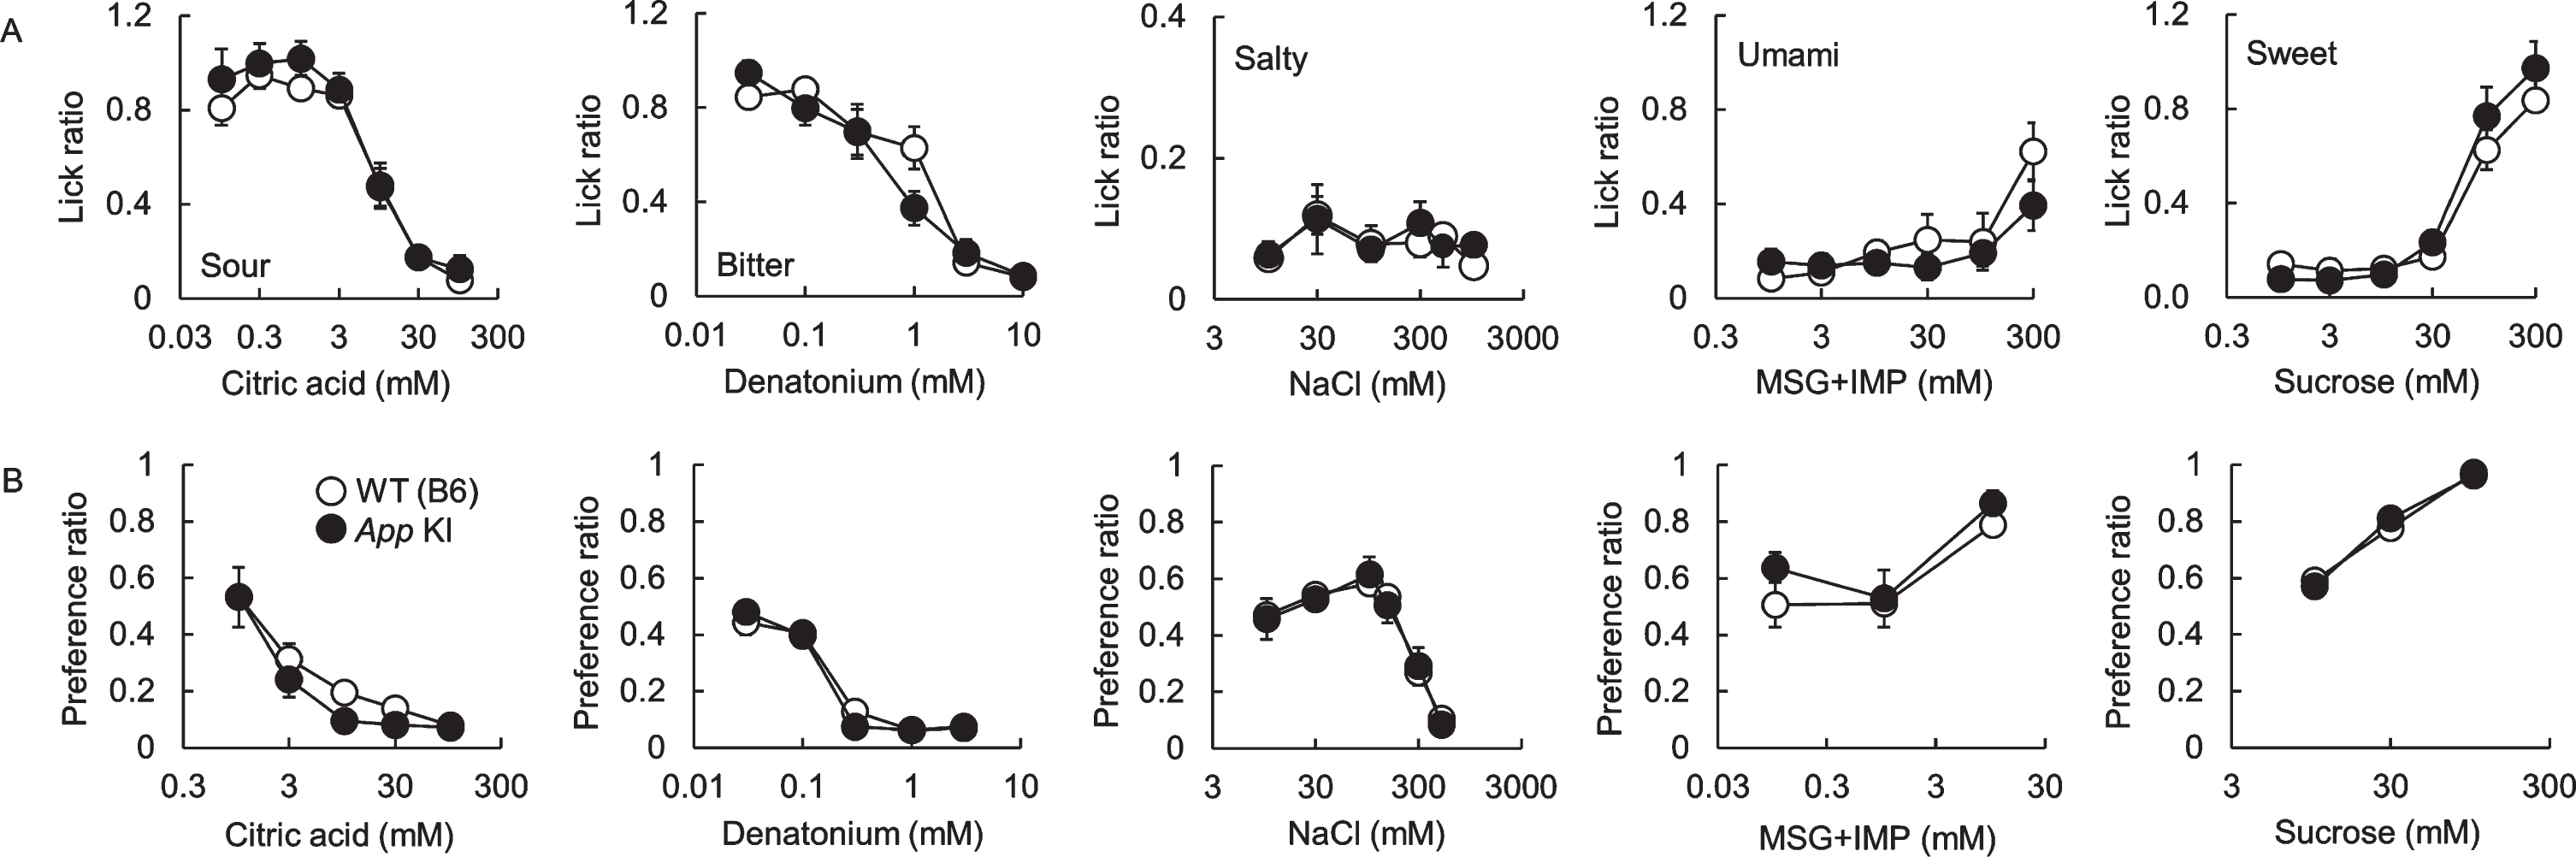 Comparison of taste sensitivities for basic tastes in wild type (WT) and App knock-in (KI) mice. The lick (A) and preference (B) ratios for citric acid, denatonium, NaCl, MSG + 0.5 mM IMP, and sucrose are shown. White and black circles indicate WT and App KI mice, respectively.